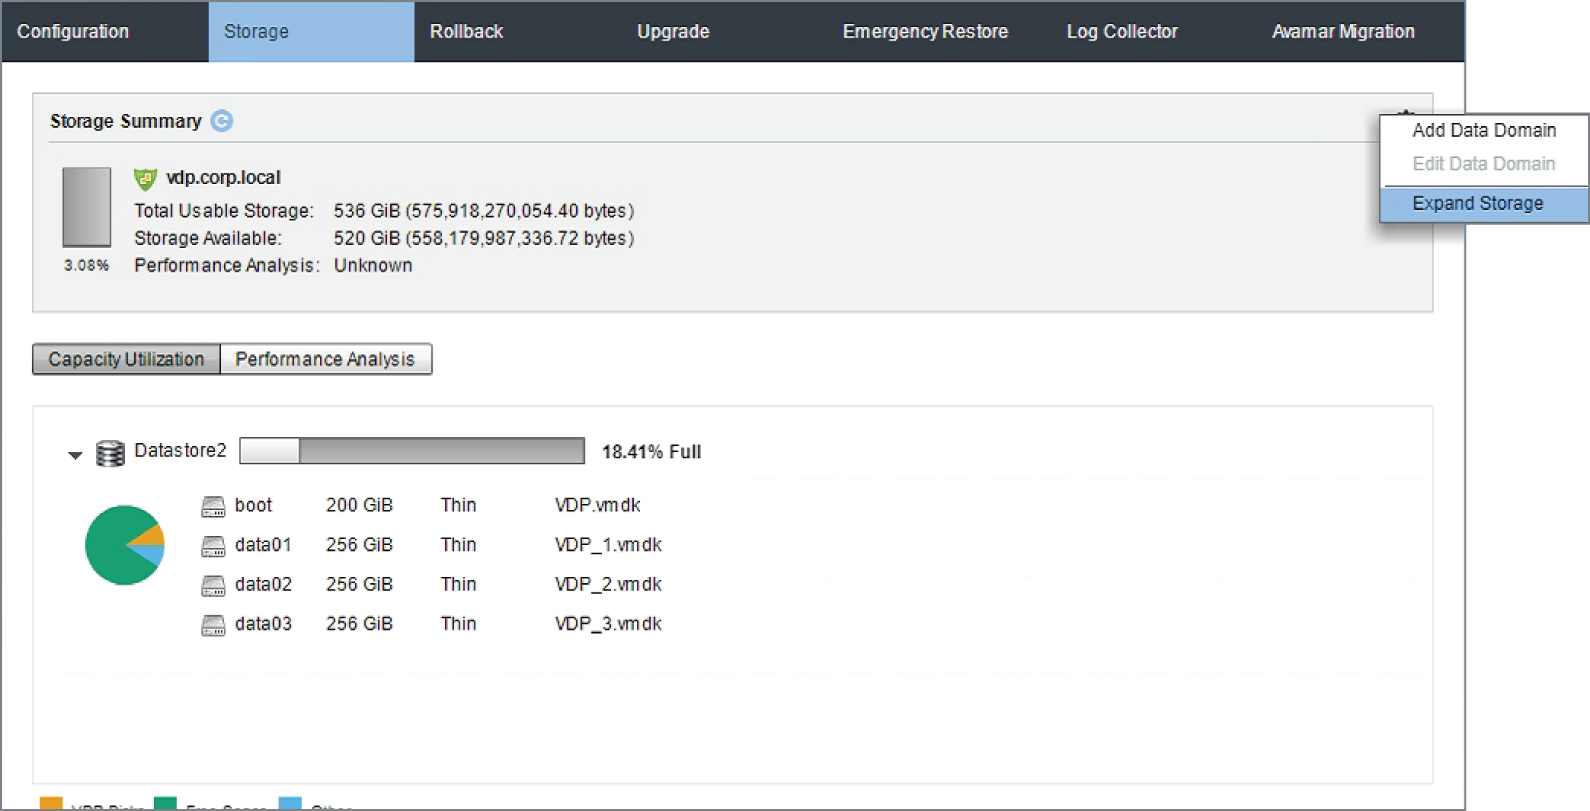 Snapshot of launching the expand storage utility for VDP.